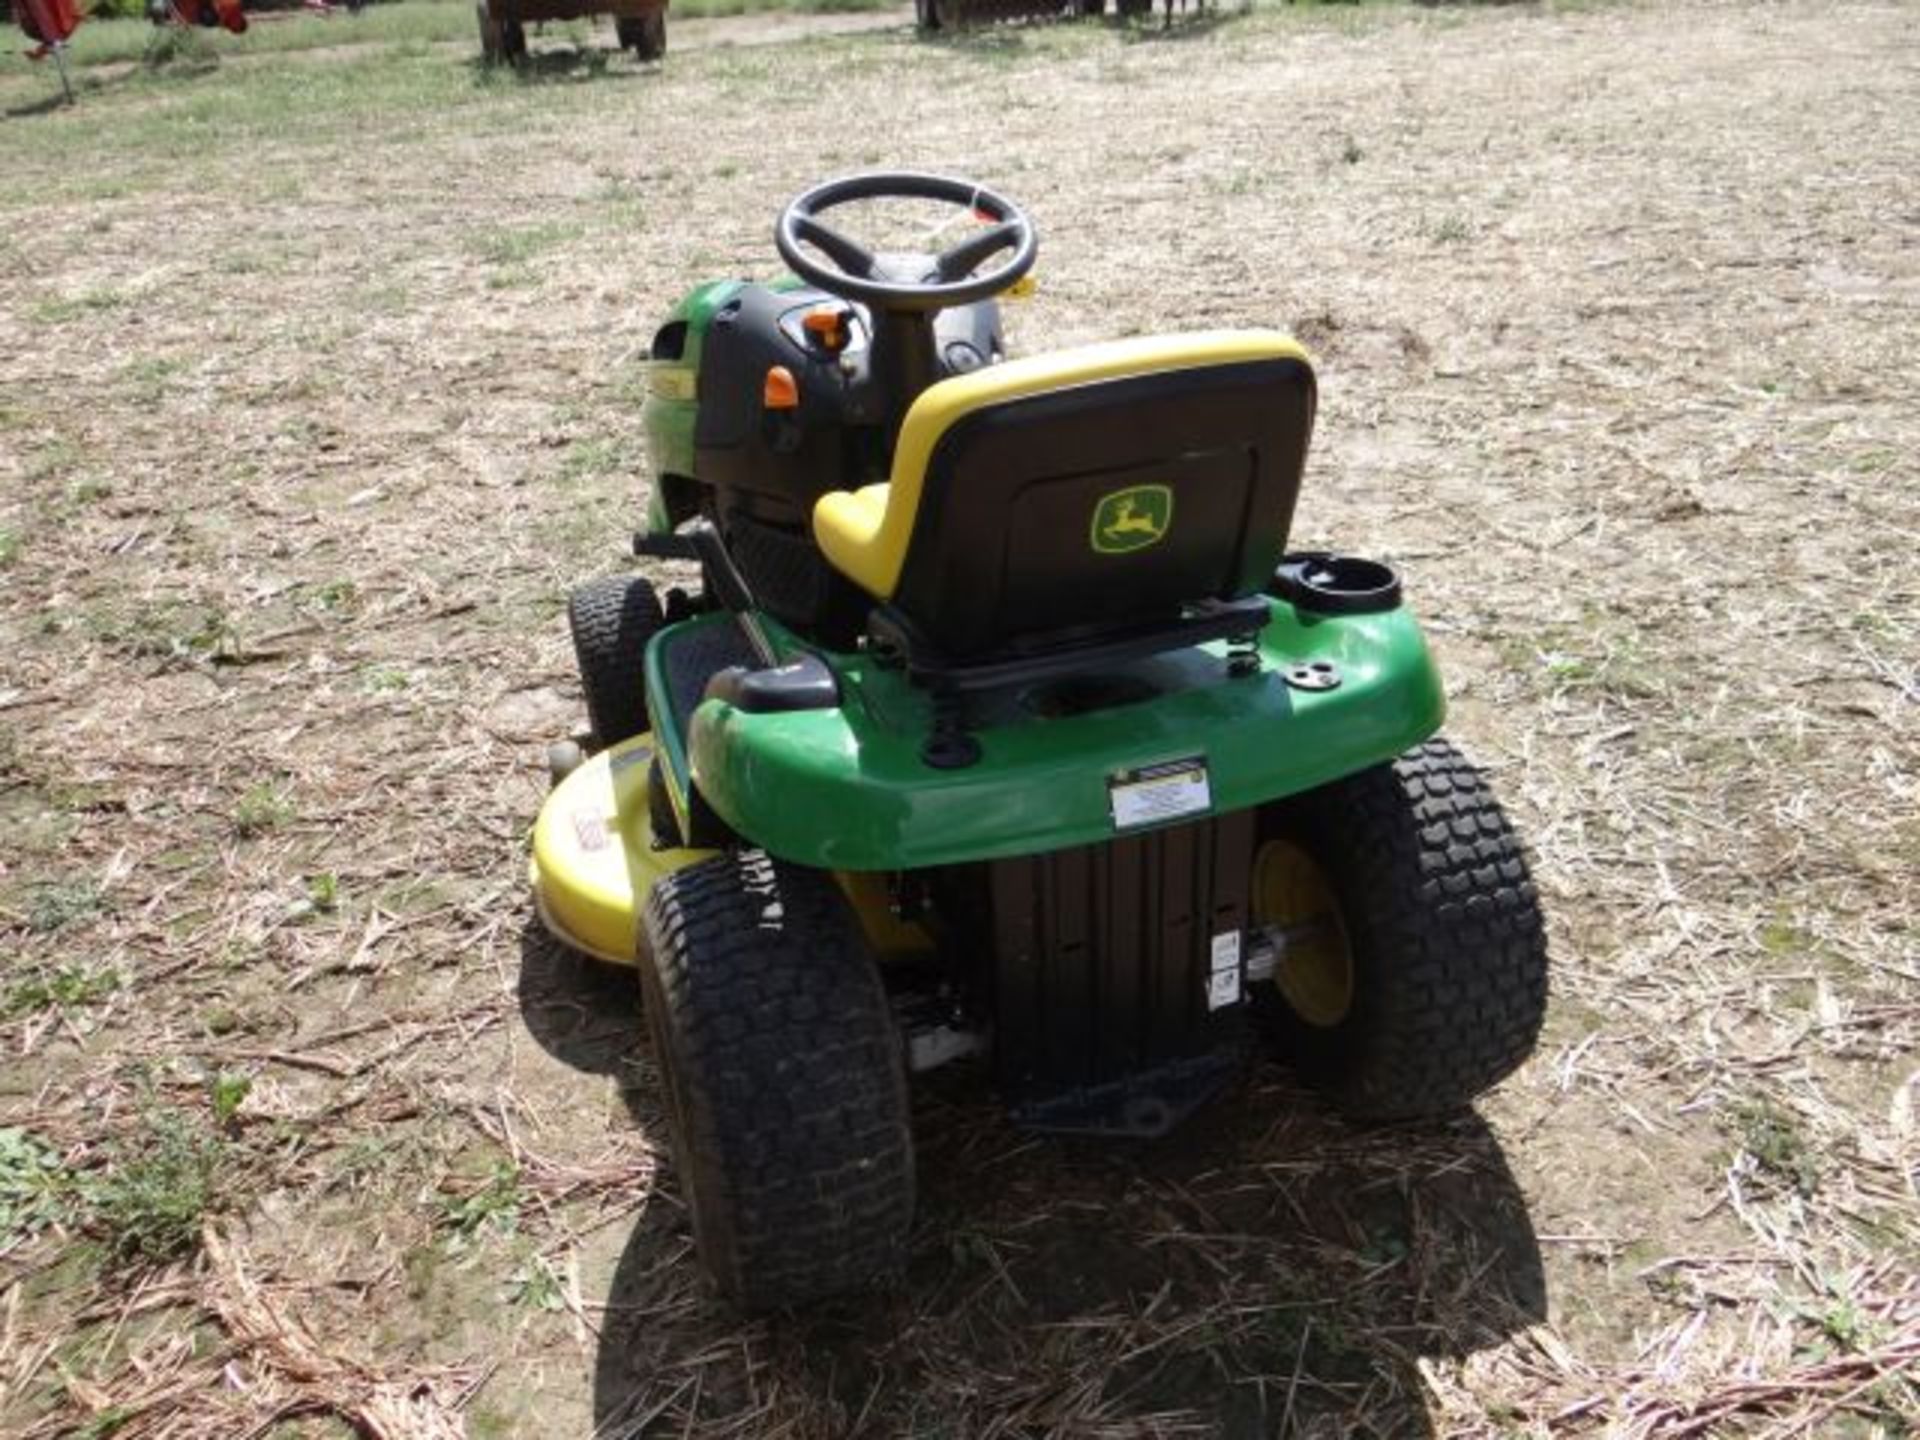 Lot 650 2006 JD 125 Riding Mower 120 hrs, 42" Deck, 20hp - Image 3 of 3